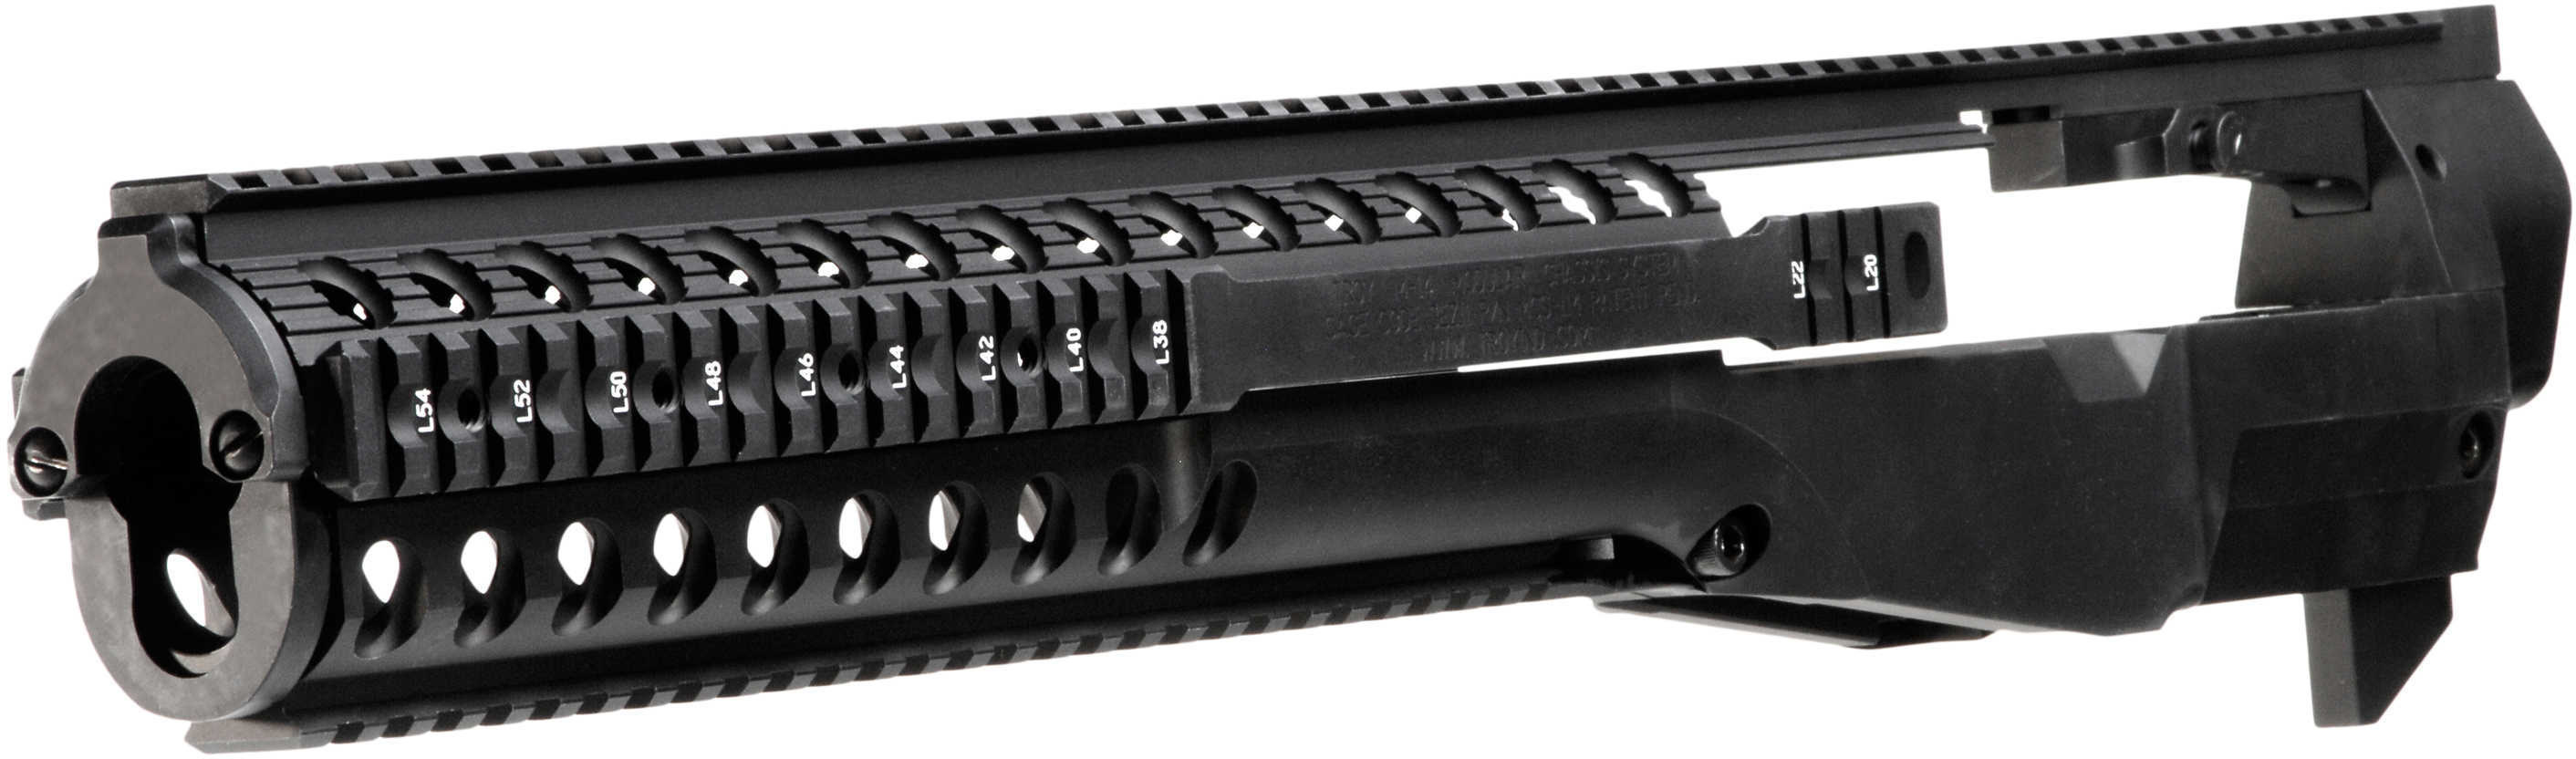 Troy Ind MCSC0BT00 Modular M14 Chassis AR-15/M16/M4 Aluminum/Stainless Steel Black Hard Coat Anodized